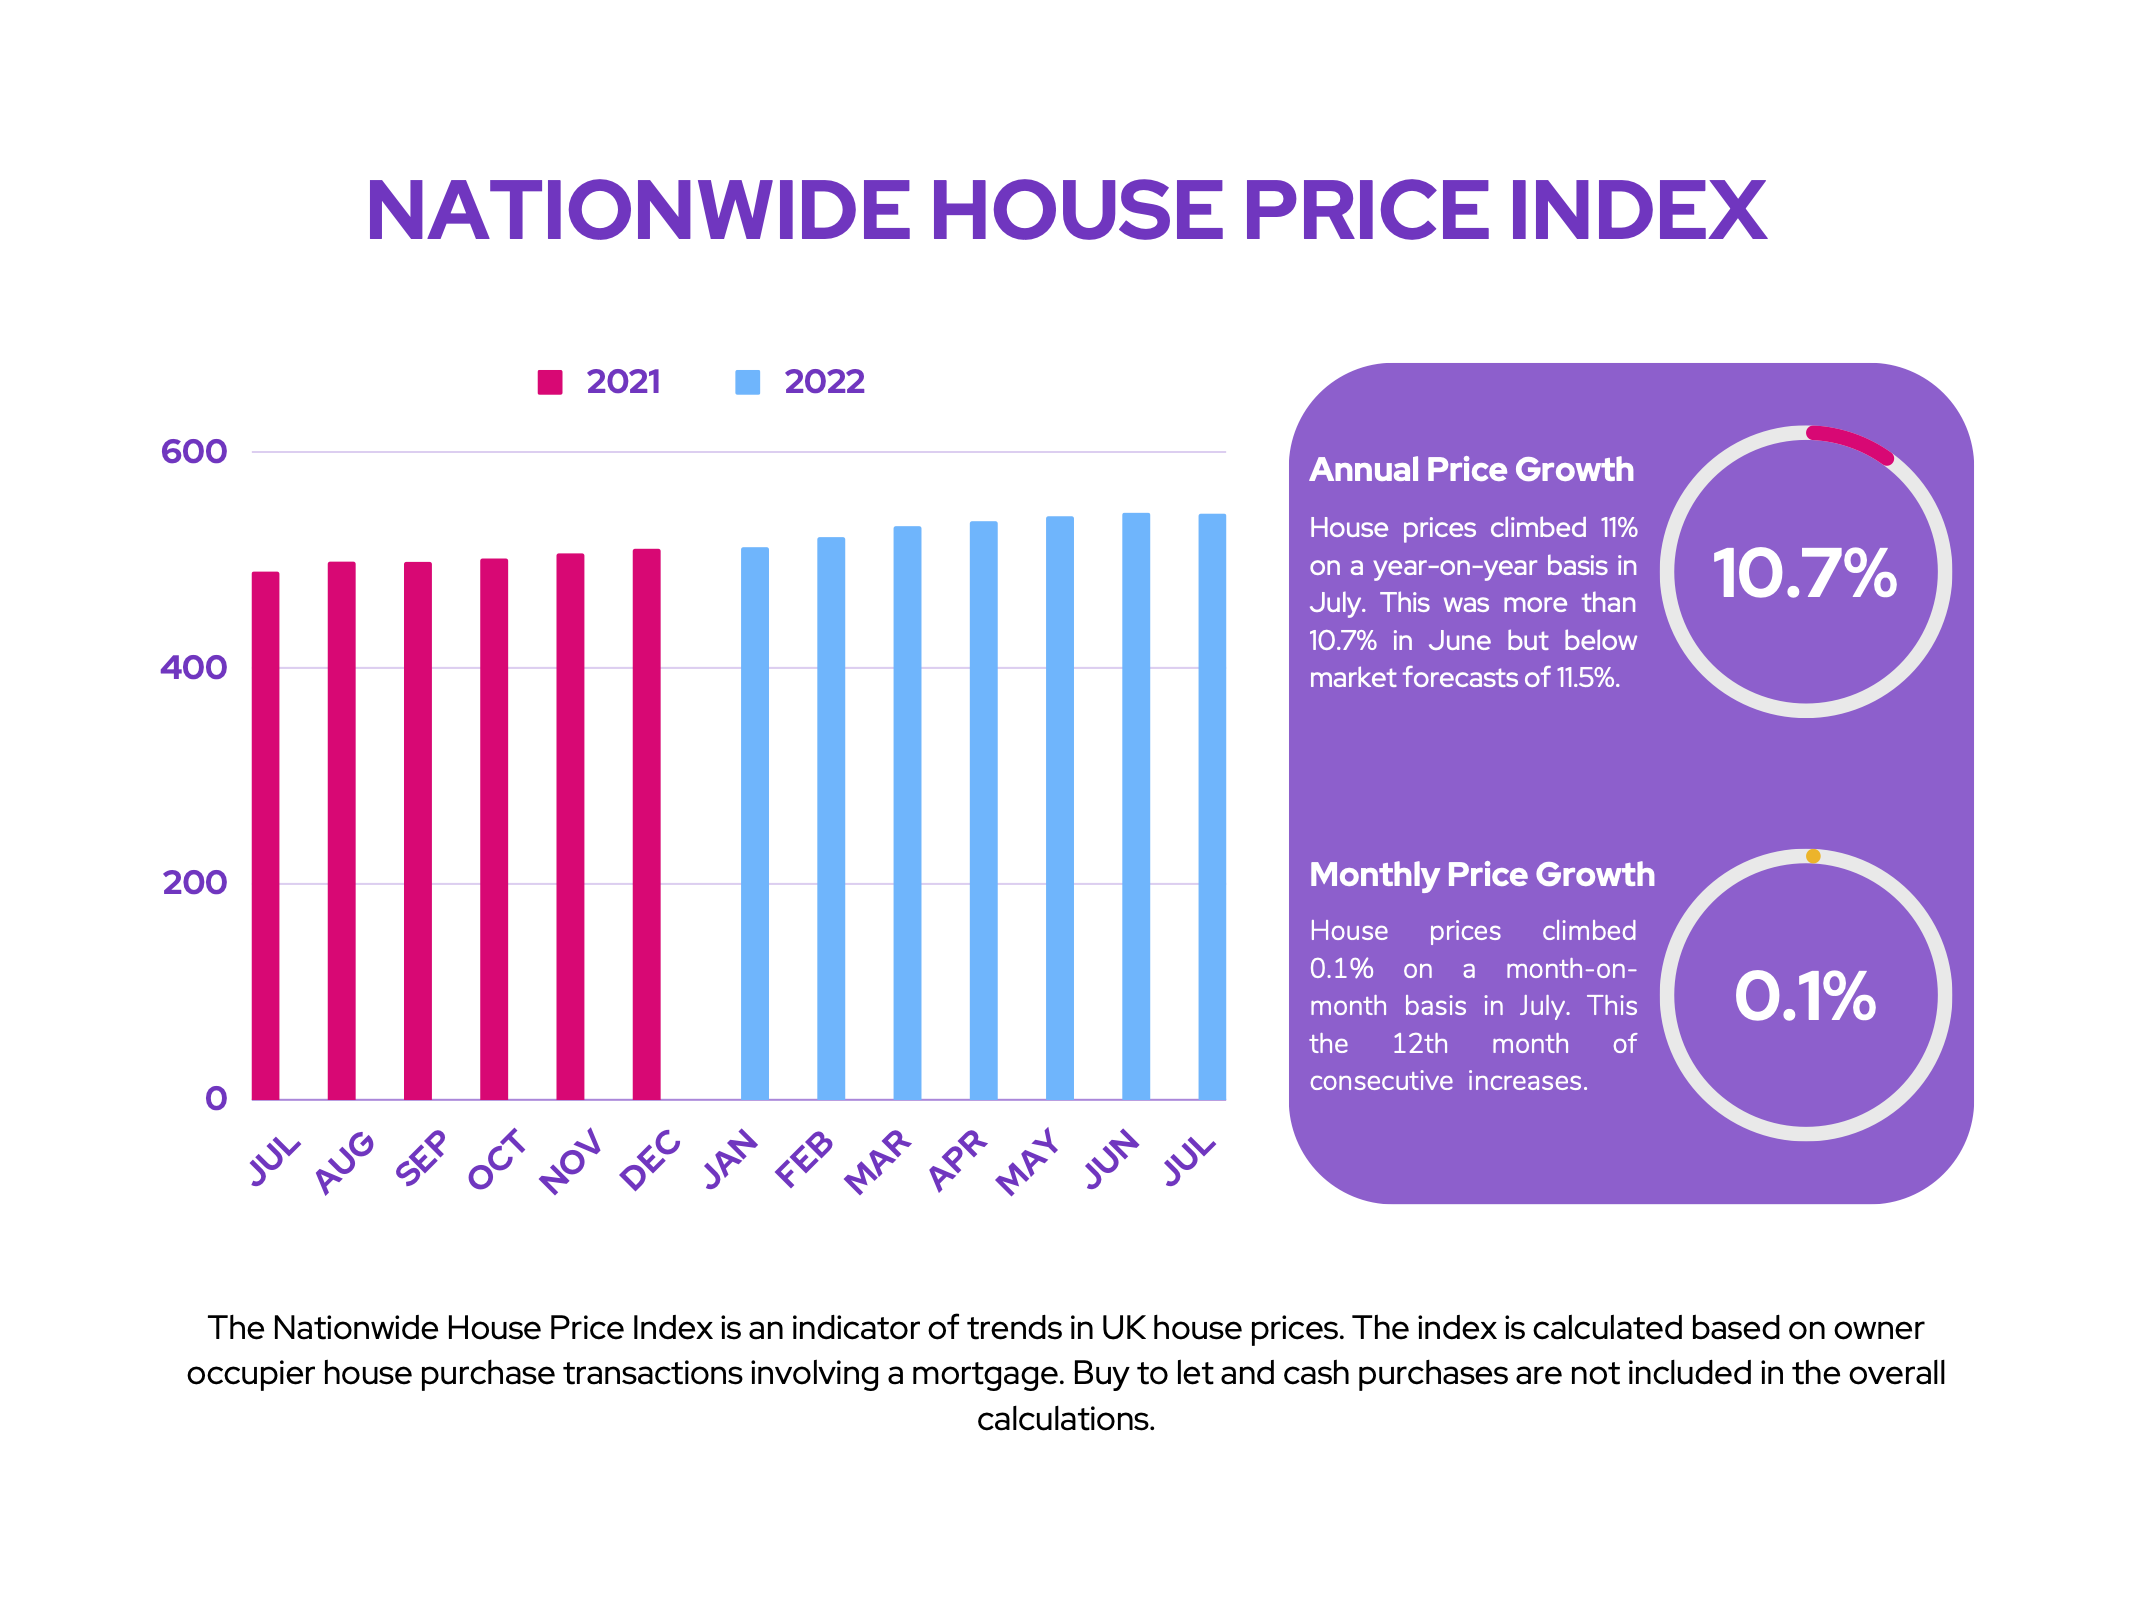 Taylor Wimpey: Nationwide House Price Index